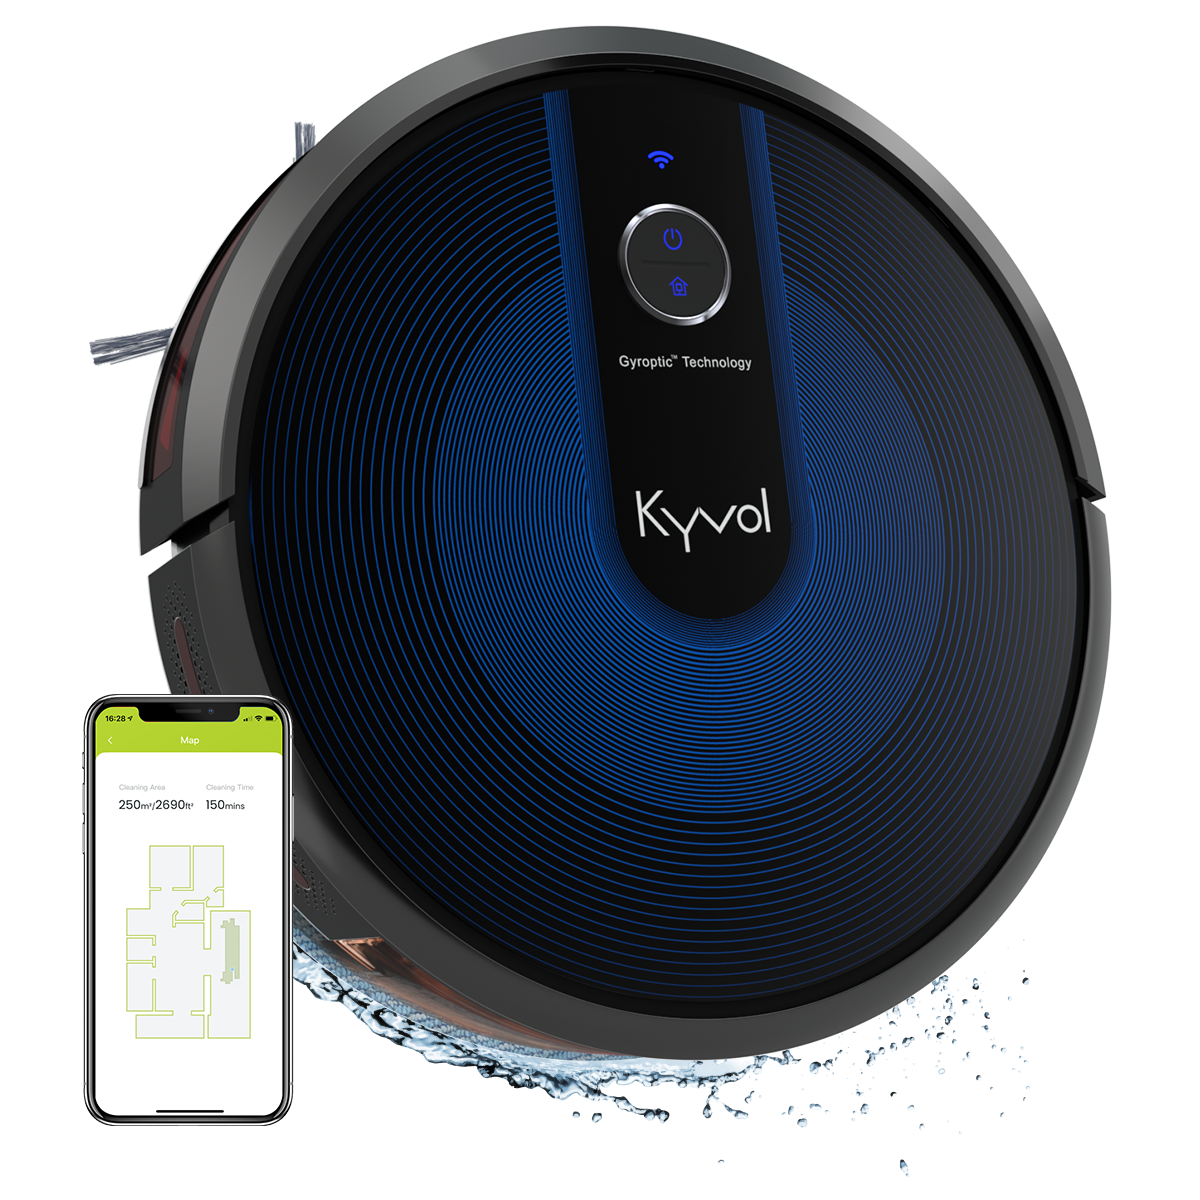 Kyvol E31 Robotic Vacuum and Mop Cleaner, Auto Sweeping & Mopping 2-in-1, 2200Pa Suction, Self Charging, Smart Navigation, 150 mins Runtime, Works with Alexa, Ideal for Pet Hair, Floor and Carpets - image 1 of 8